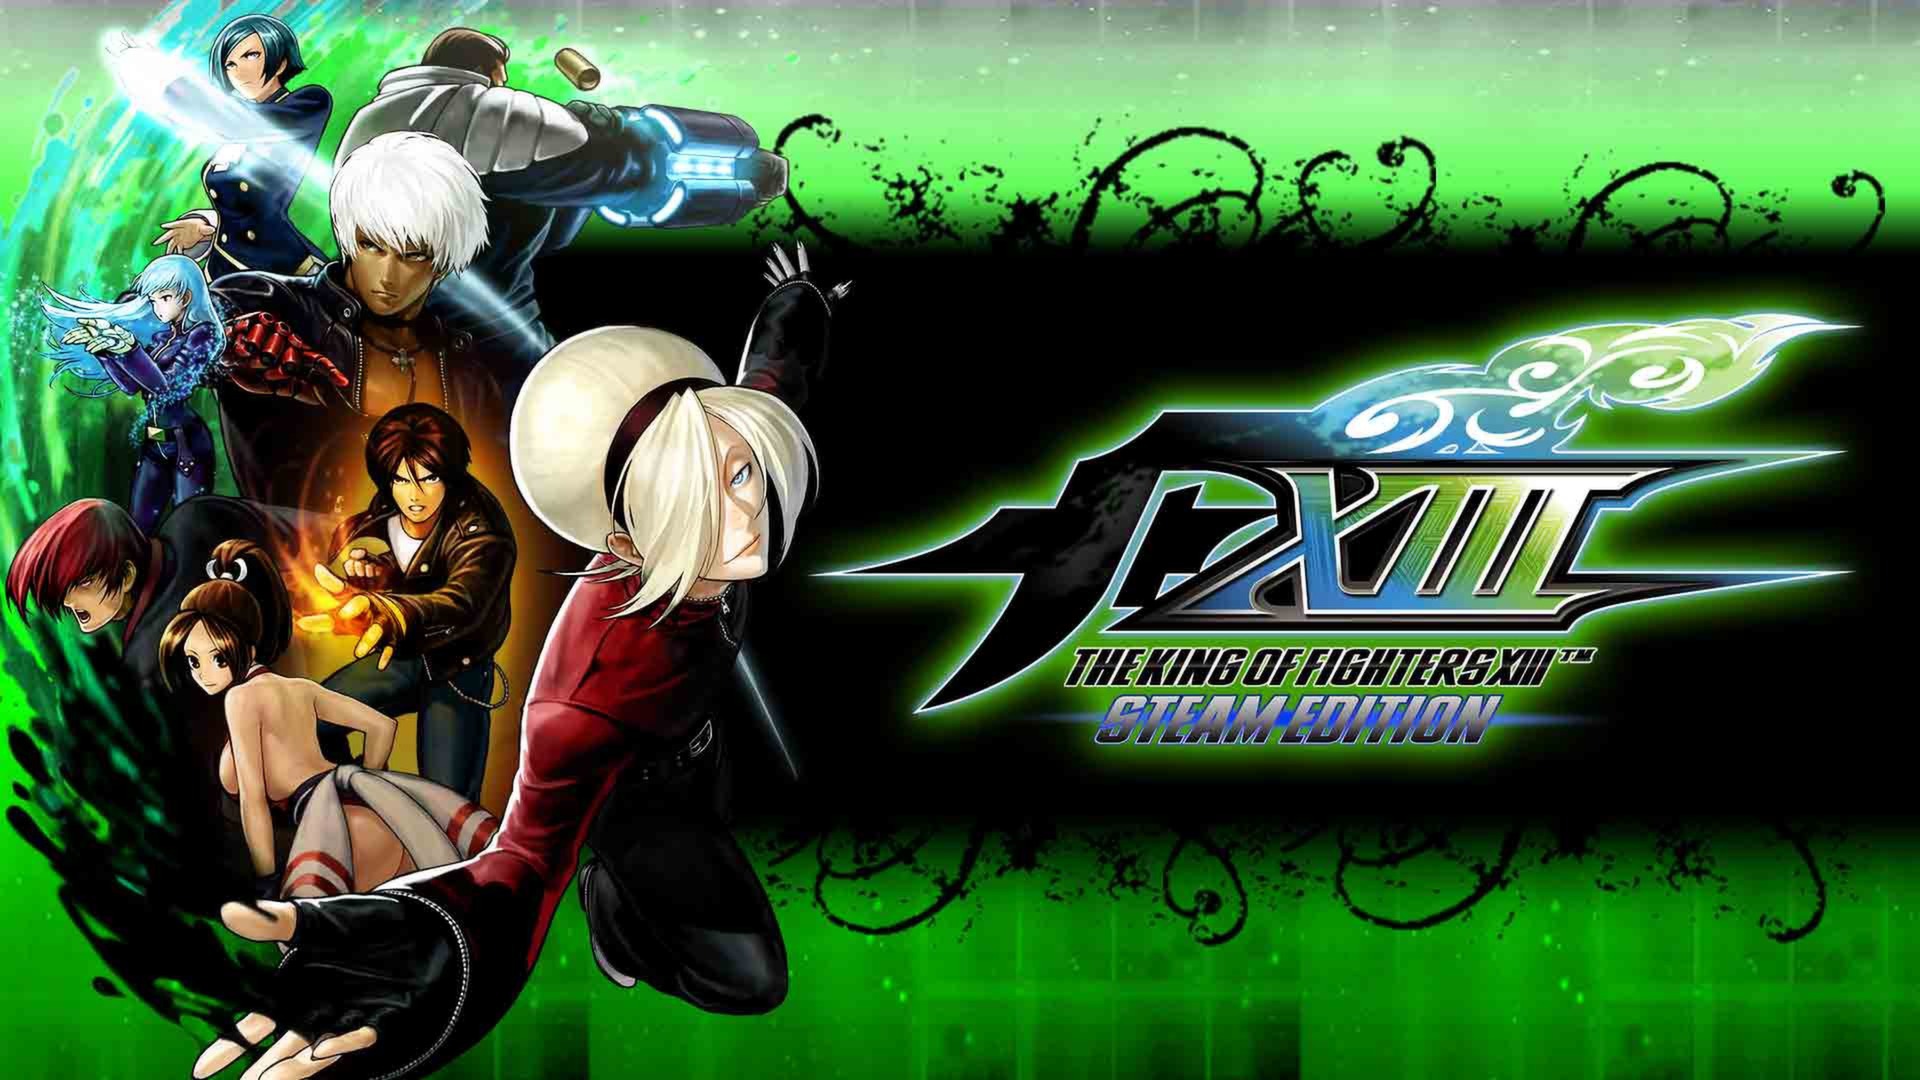 http://operationrainfall.com/wp-content/uploads/2013/08/King-of-Fighters-XIII-Steam-Edition.jpg